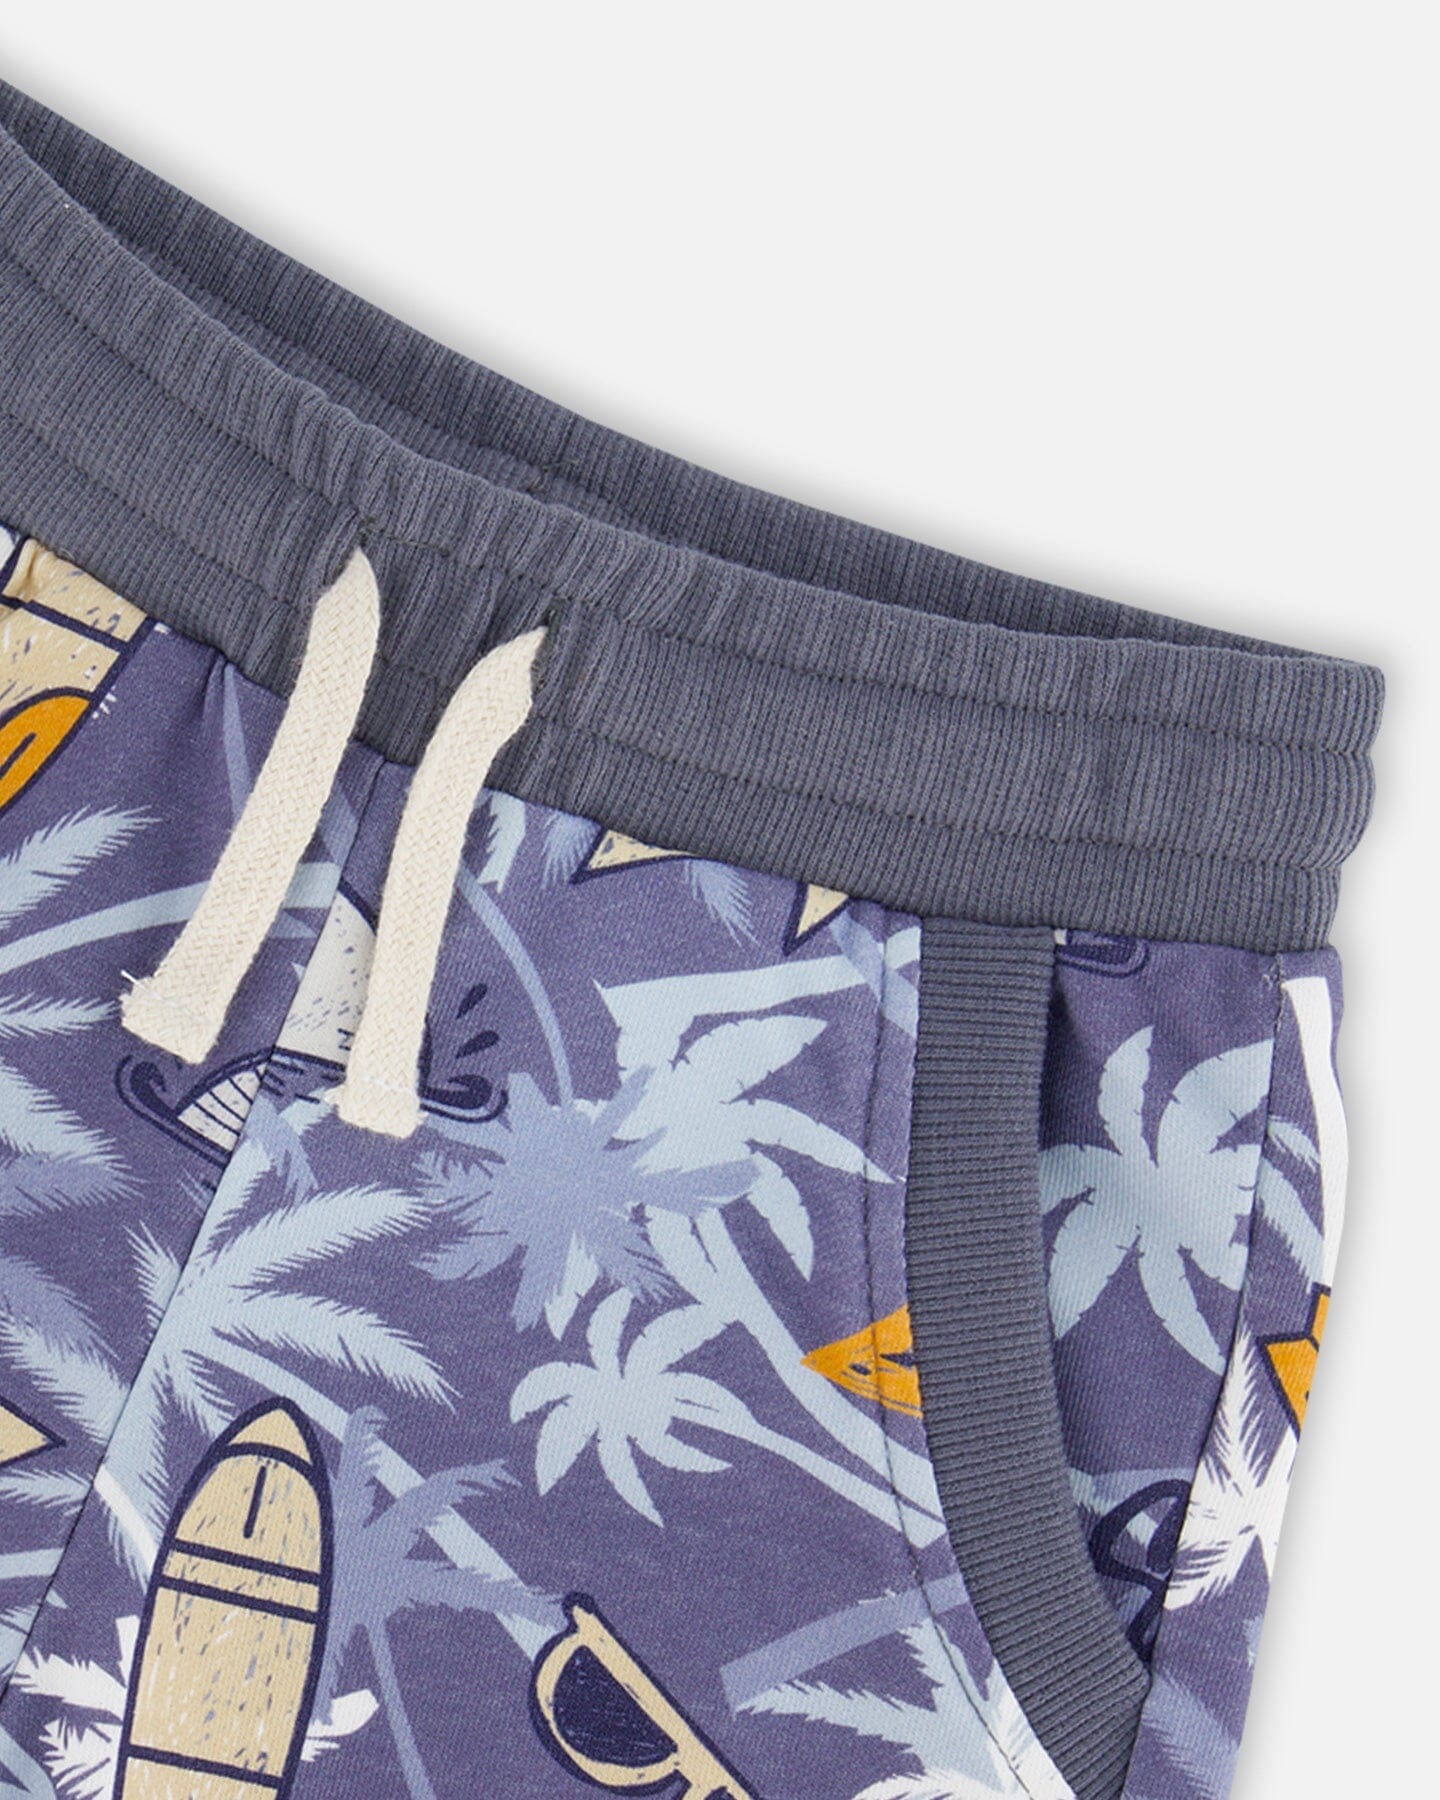 French Terry Short Printed Palm Tree And Surf - F30U27_036